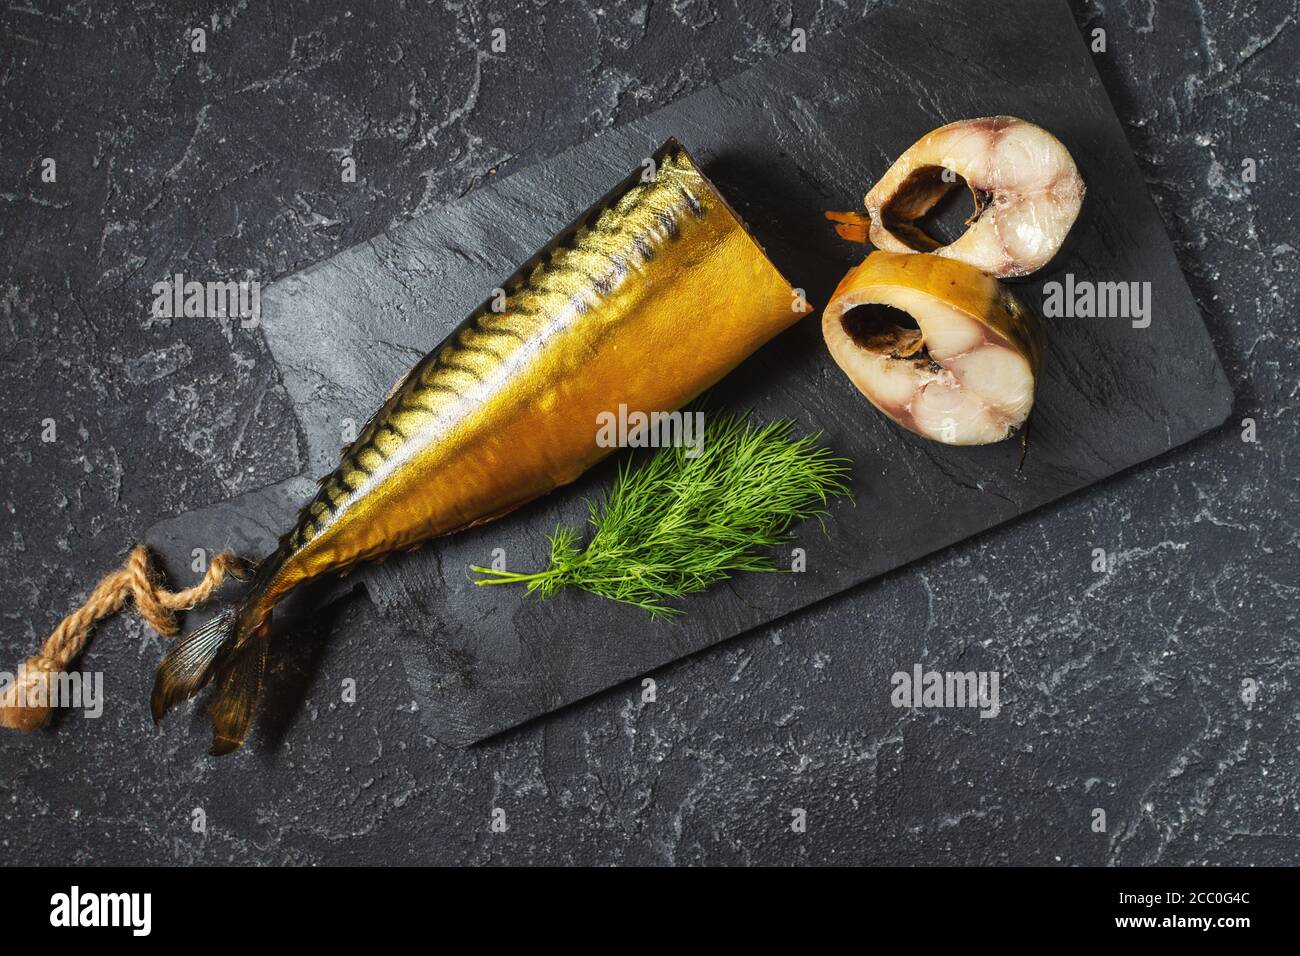 slices of smoked fish mackerel or scomber on black stone table. Top view Stock Photo